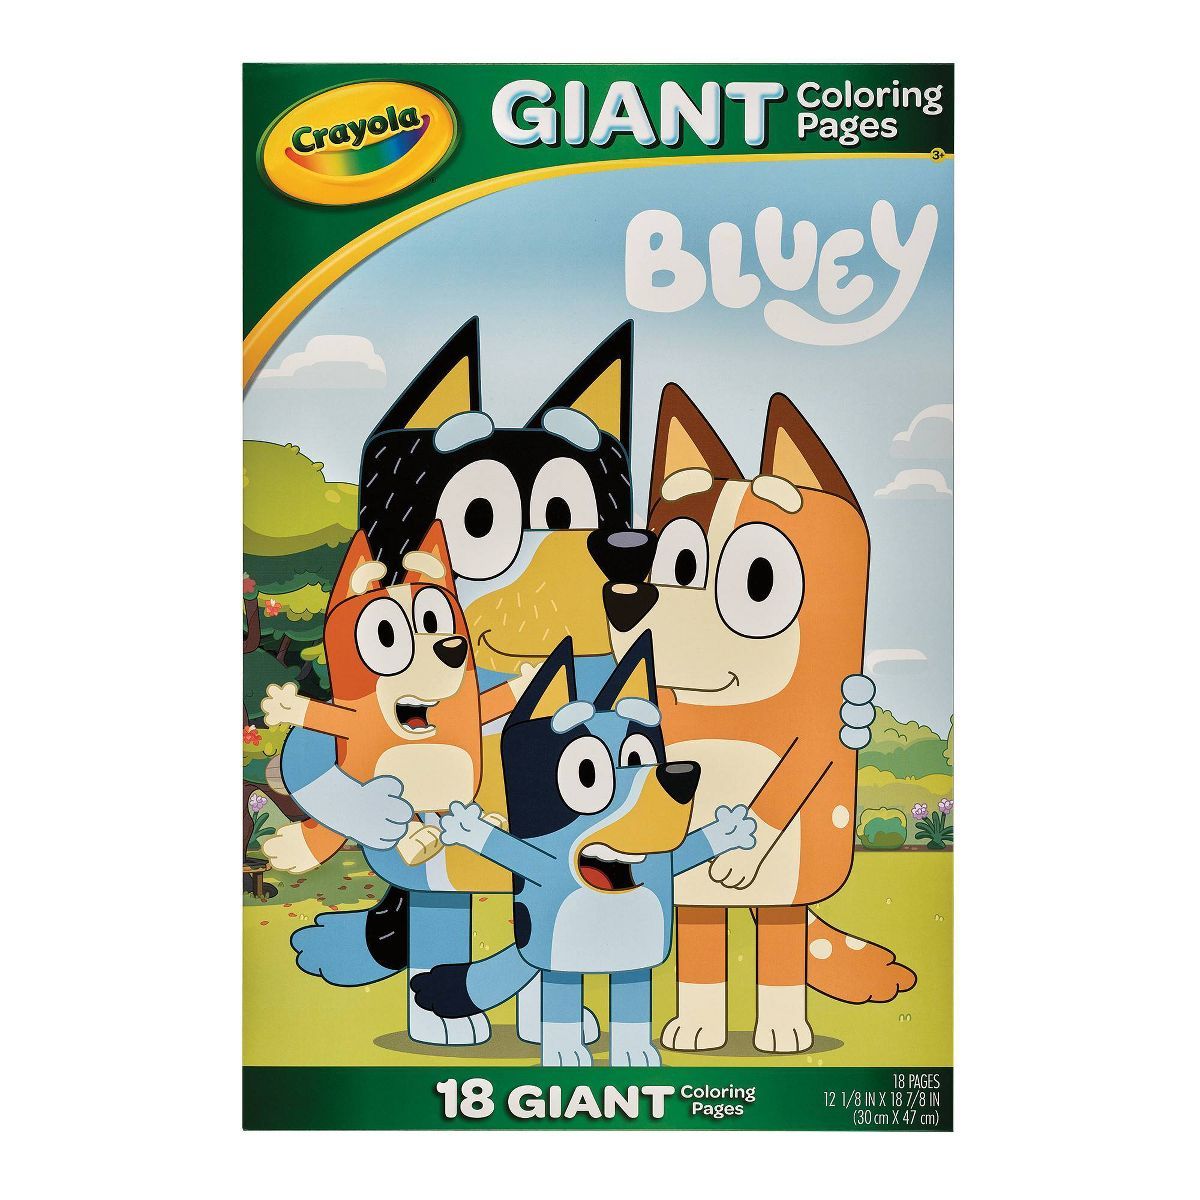 Crayola Giant Coloring Pages - Bluey | Target